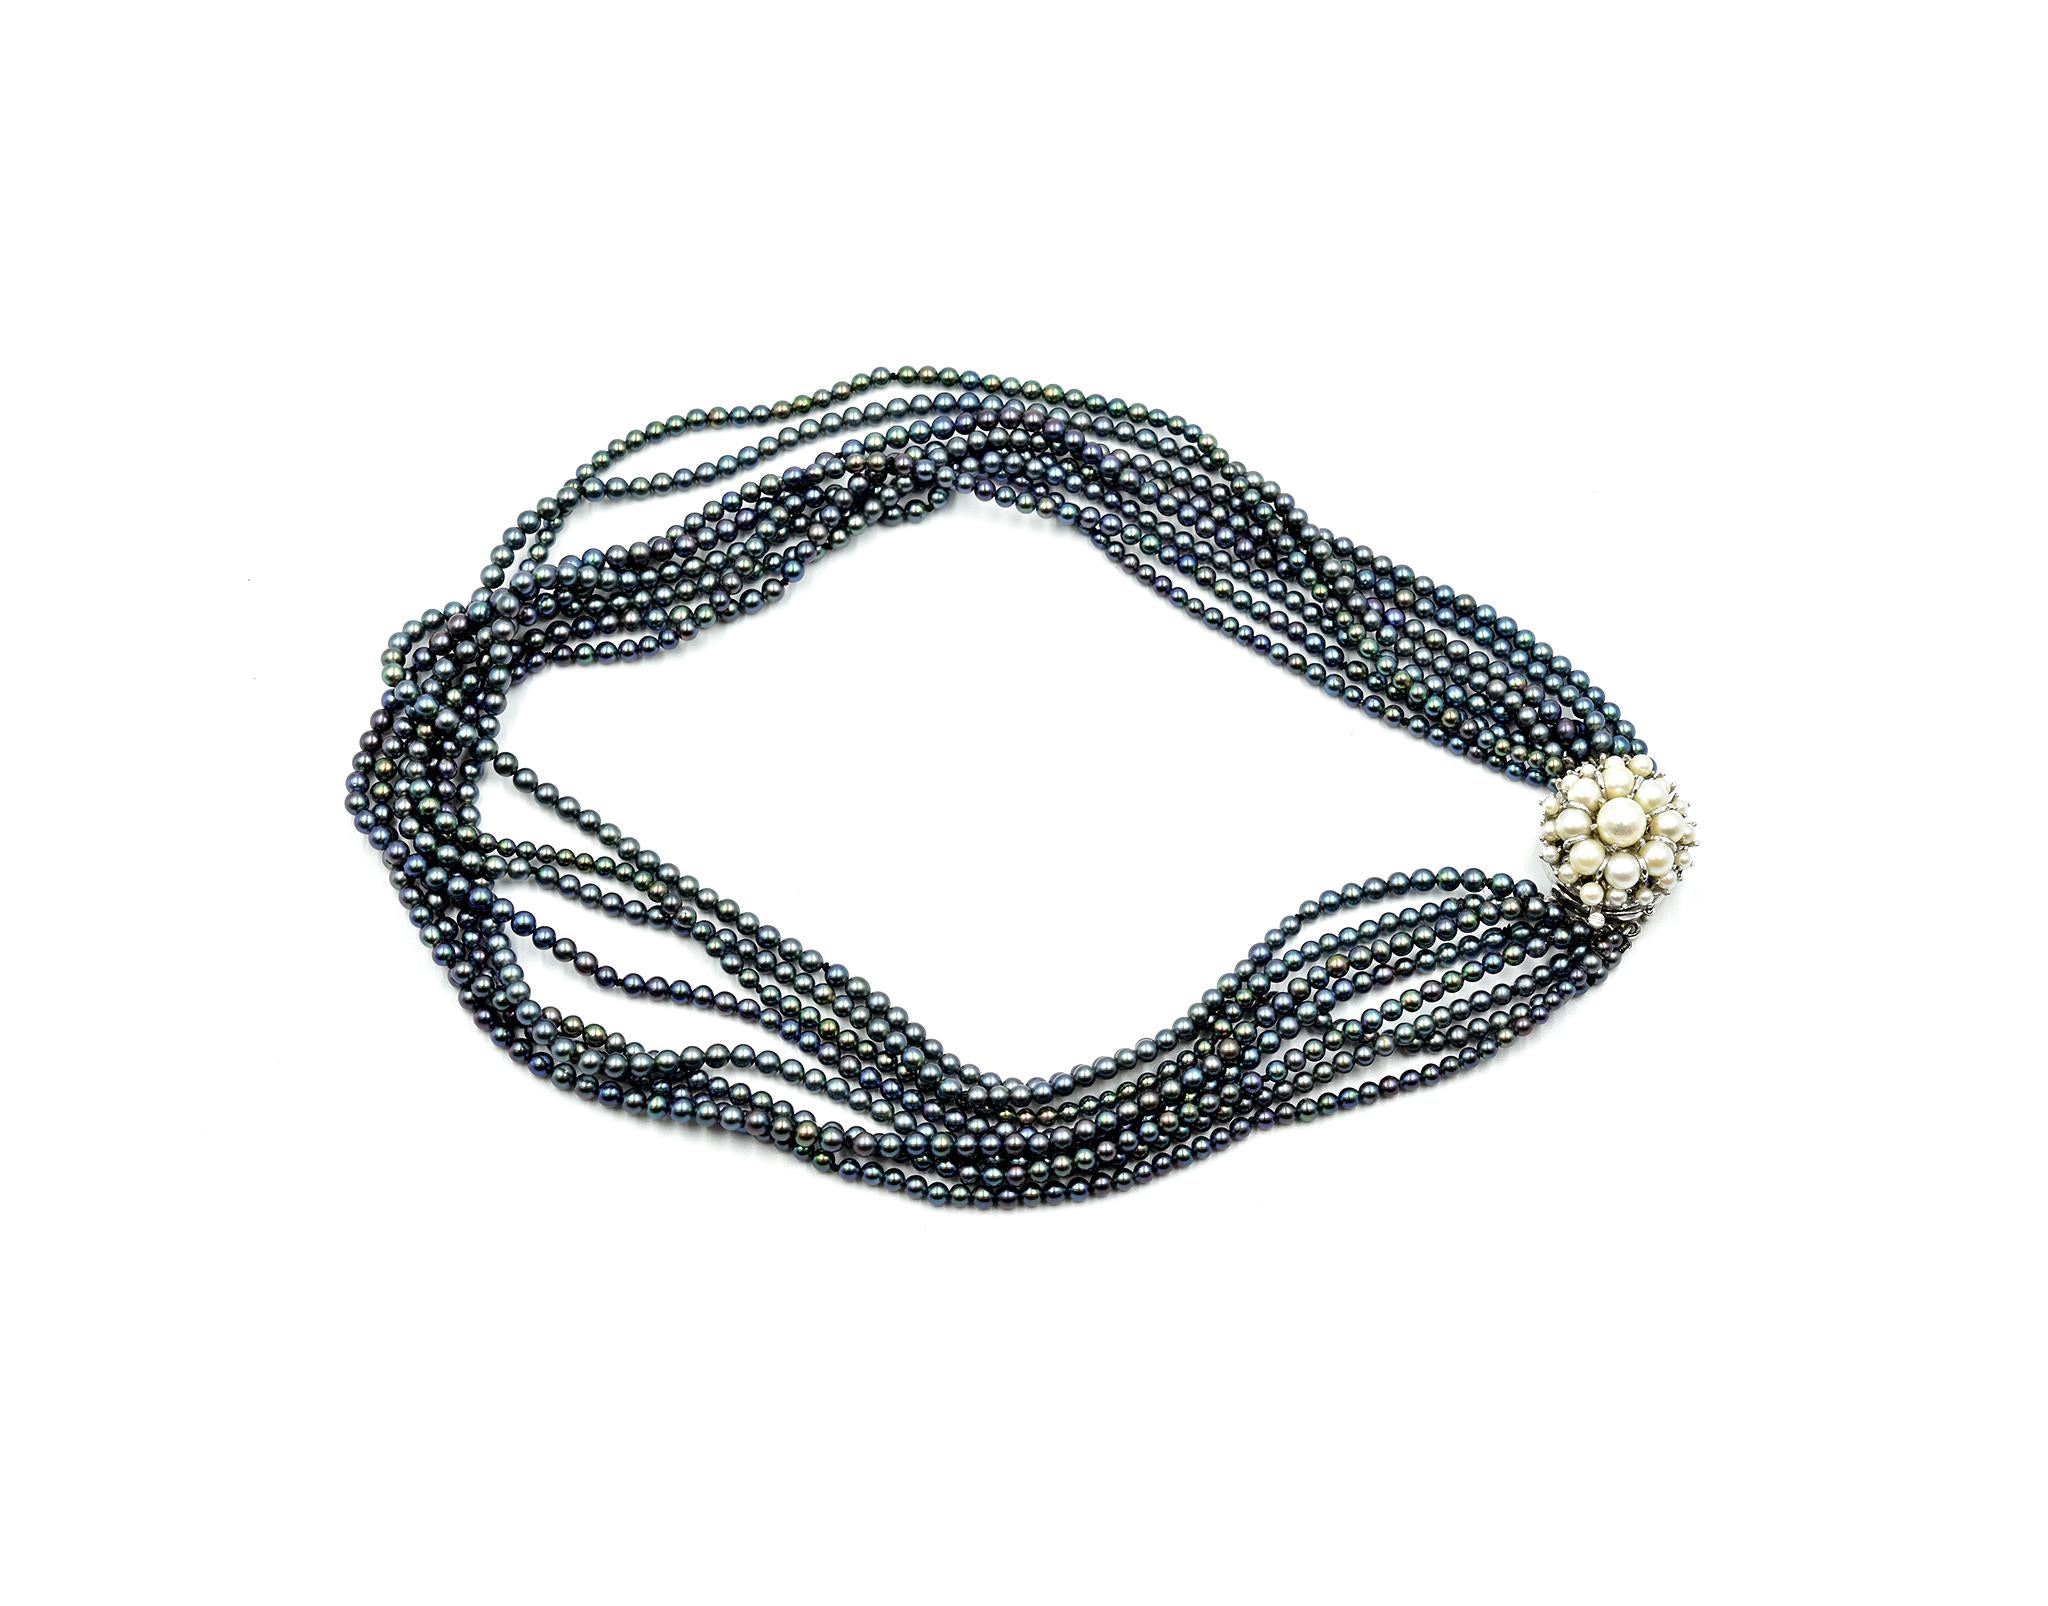 Designer: custom design
Material: 14k white gold clasp
White Cultured Pearls: cultured pearls with silver overtone 3.00mm – 6.66mm in diameter
Black Dyed Cultured Pearls: eight strands of black dyed cultured pearls 3.00mm in diameter
Dimensions: the